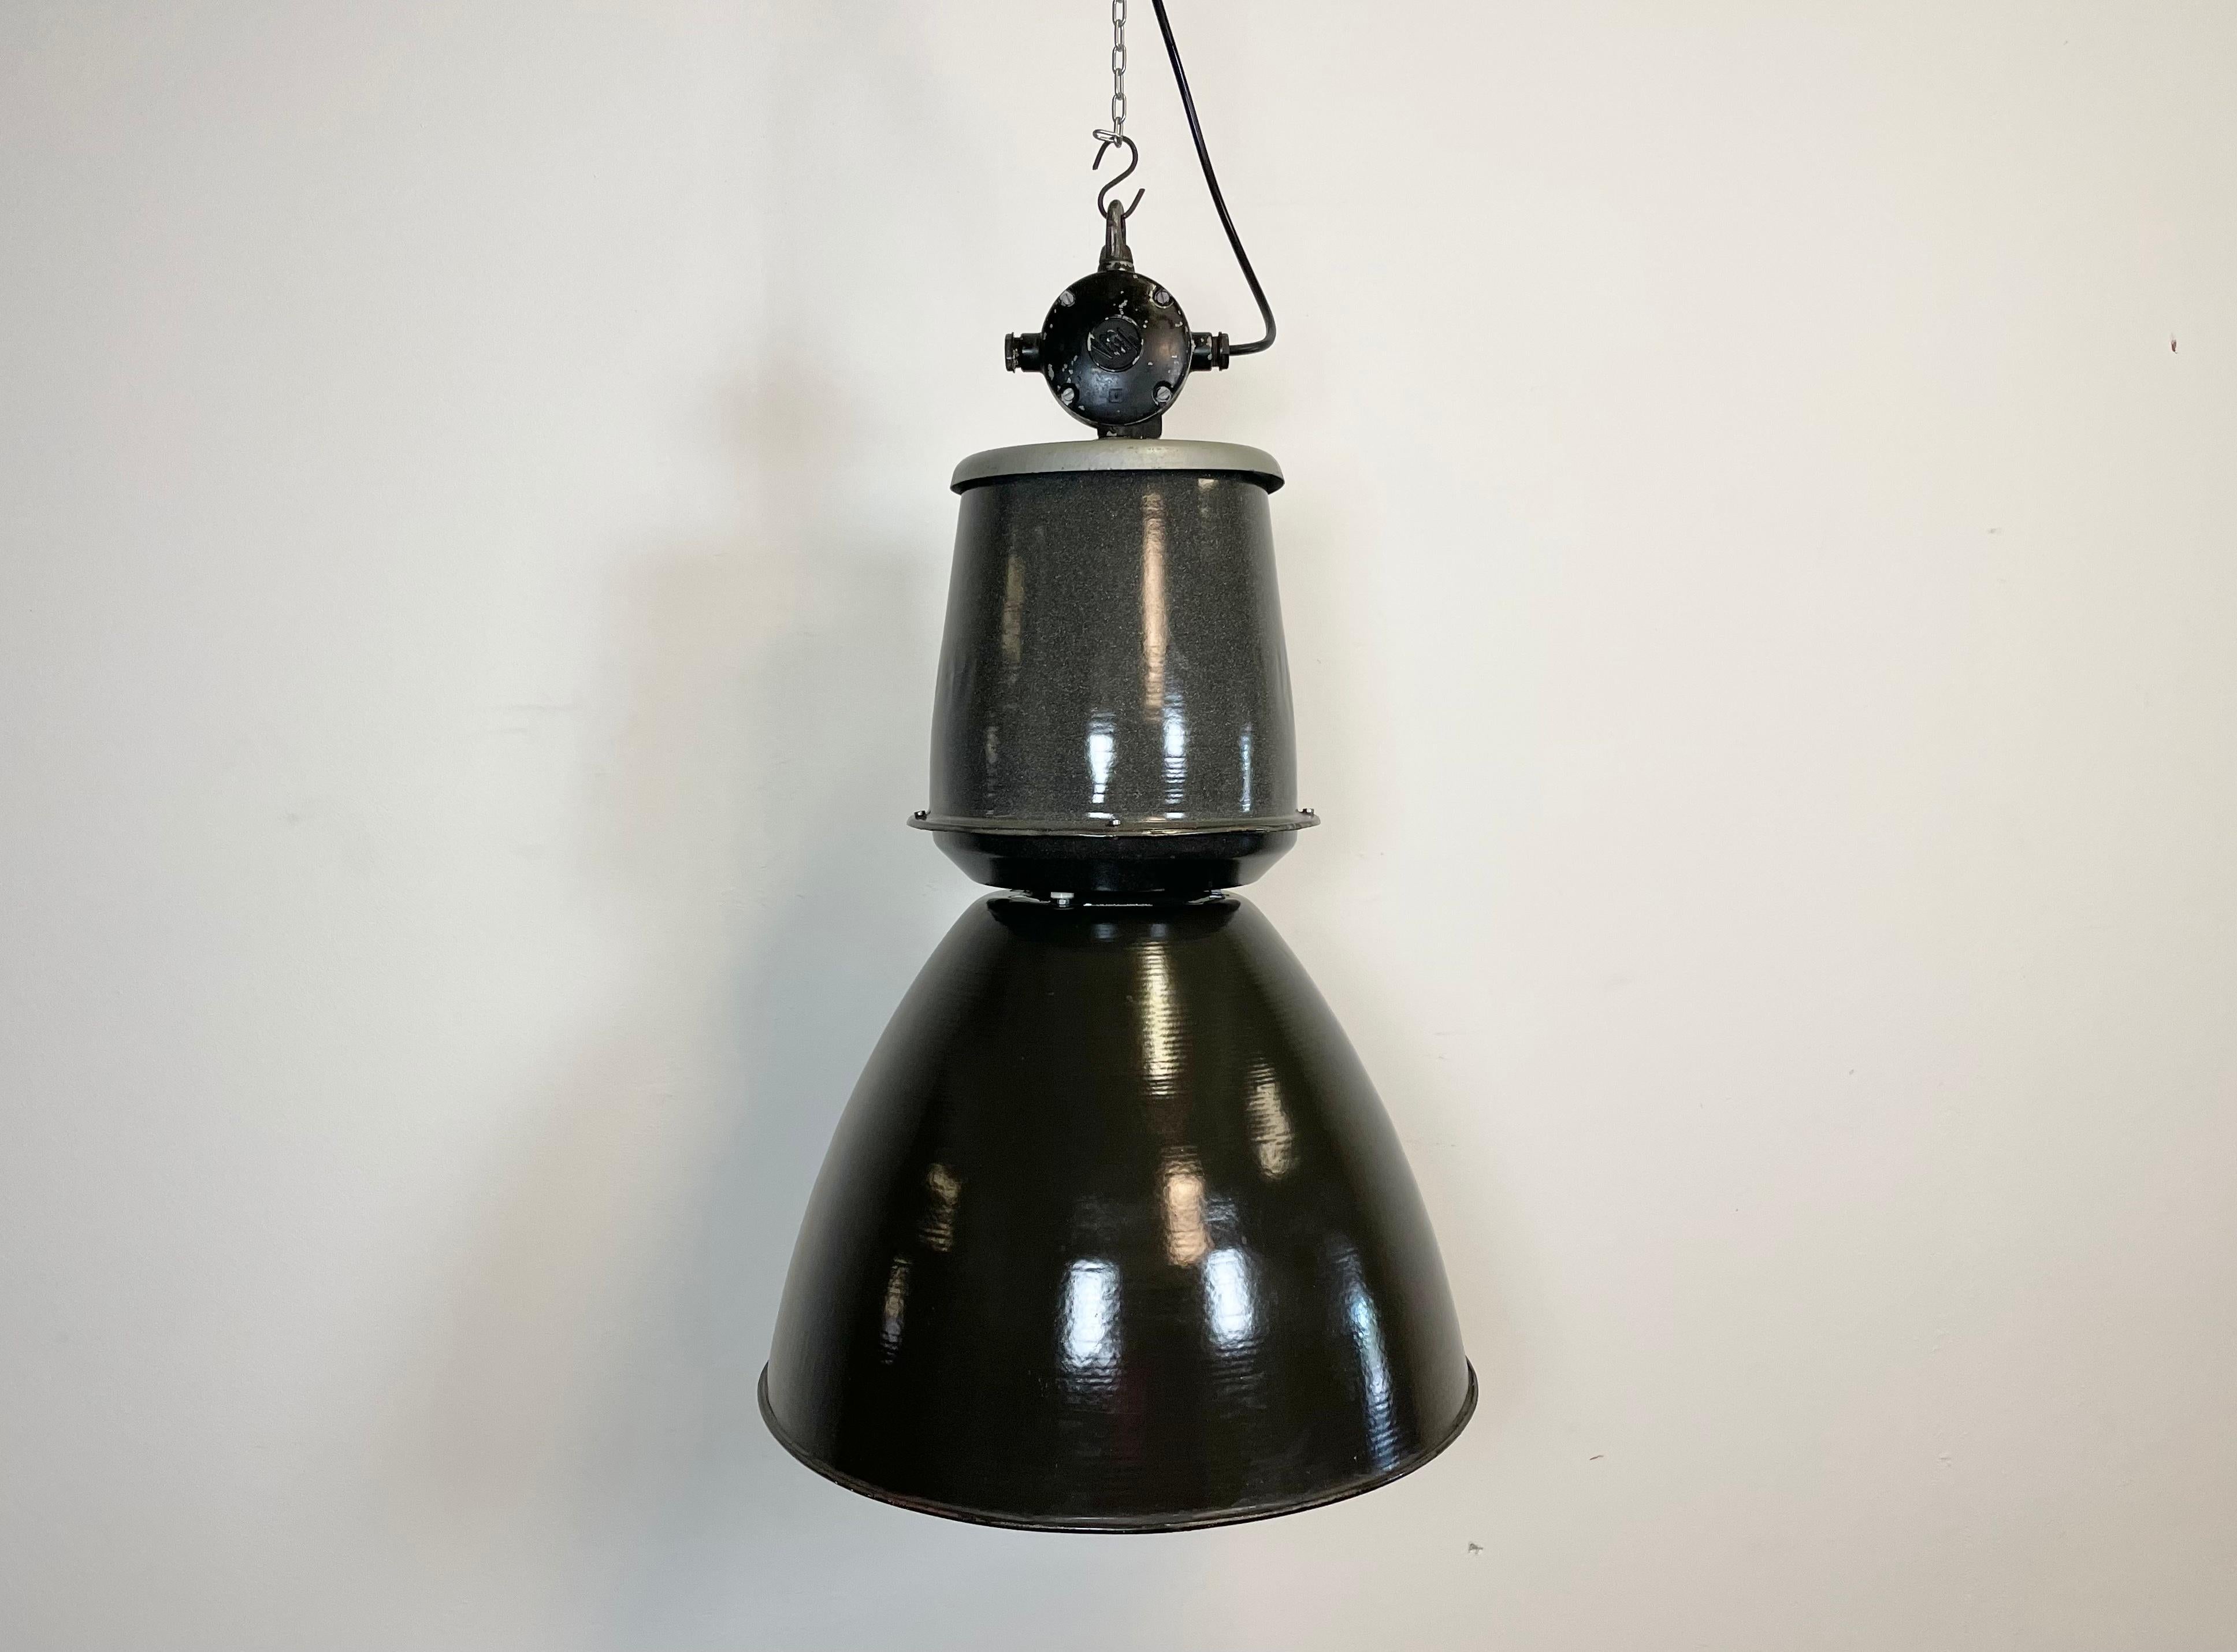 This black industrial pendant light was designed in the 1960s and produced by Elektrosvit in the former Czechoslovakia. It features a cast aluminium top, a black enamel exterior and white enamel interior.
New porcelain socket for E 27 lightbulbs